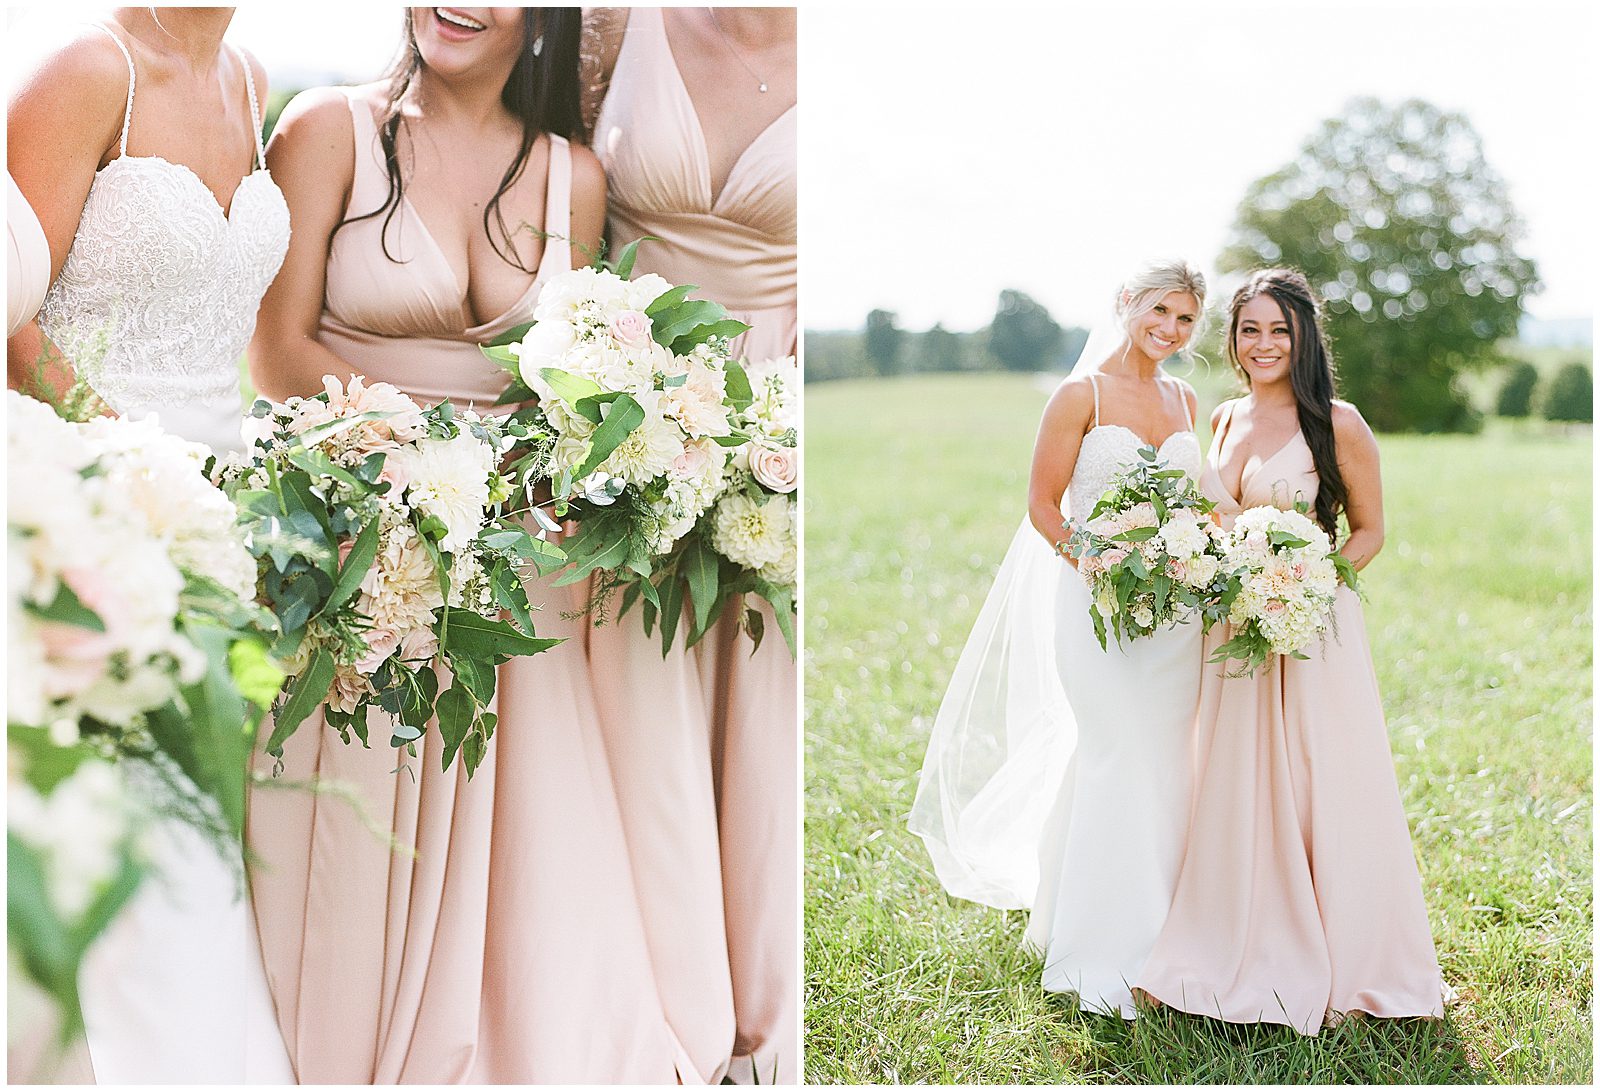 Bouquets and Bride with Maid of Honor Photos